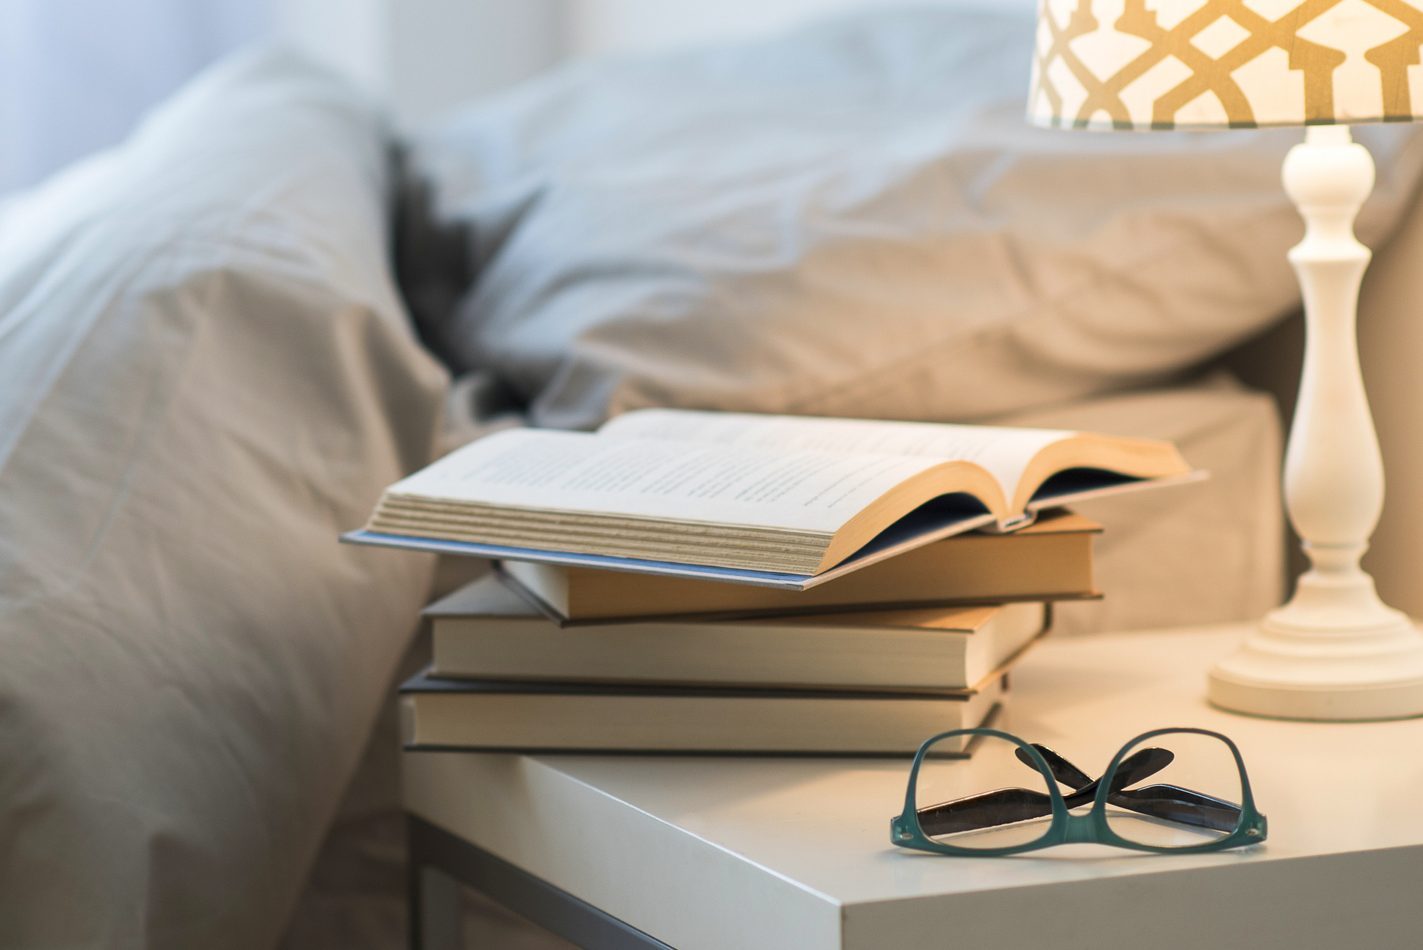 USA, New Jersey, Bed with lamp, books and glasses on bedside table